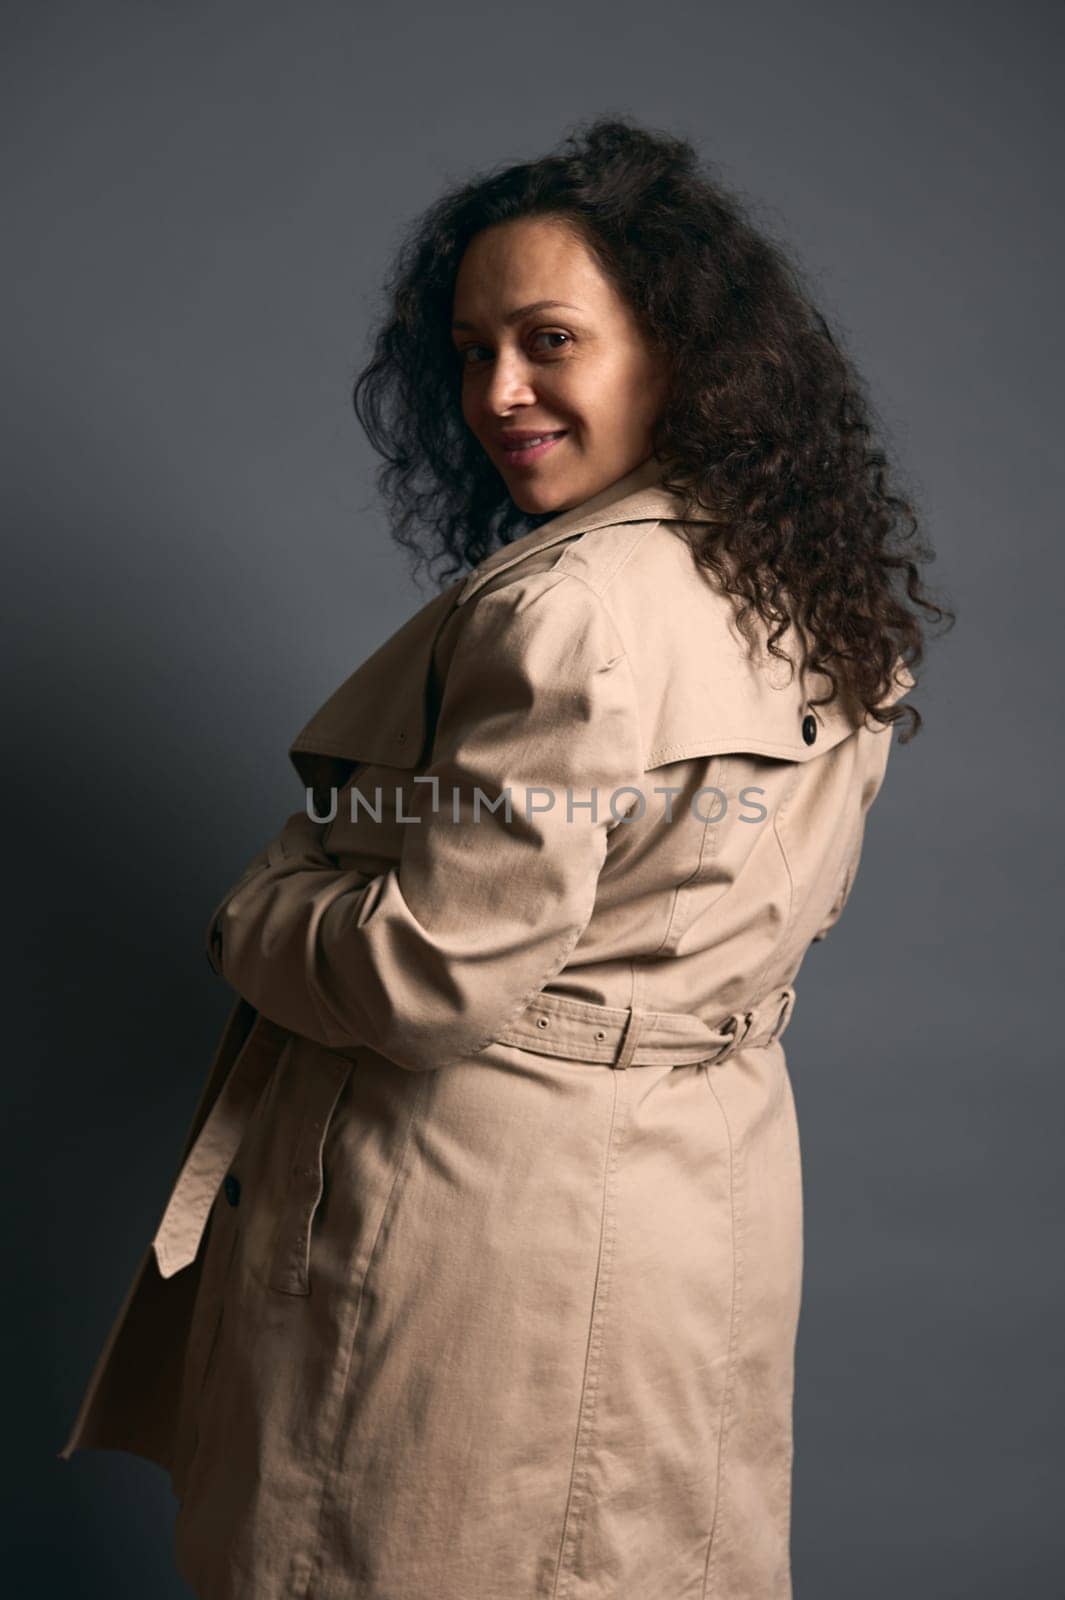 Authentic portrait of beautiful curly haired gravid woman in late time of pregnancy, wearing beige trench, smiling looking at camera through her shoulder, isolated over fashion gray studio background